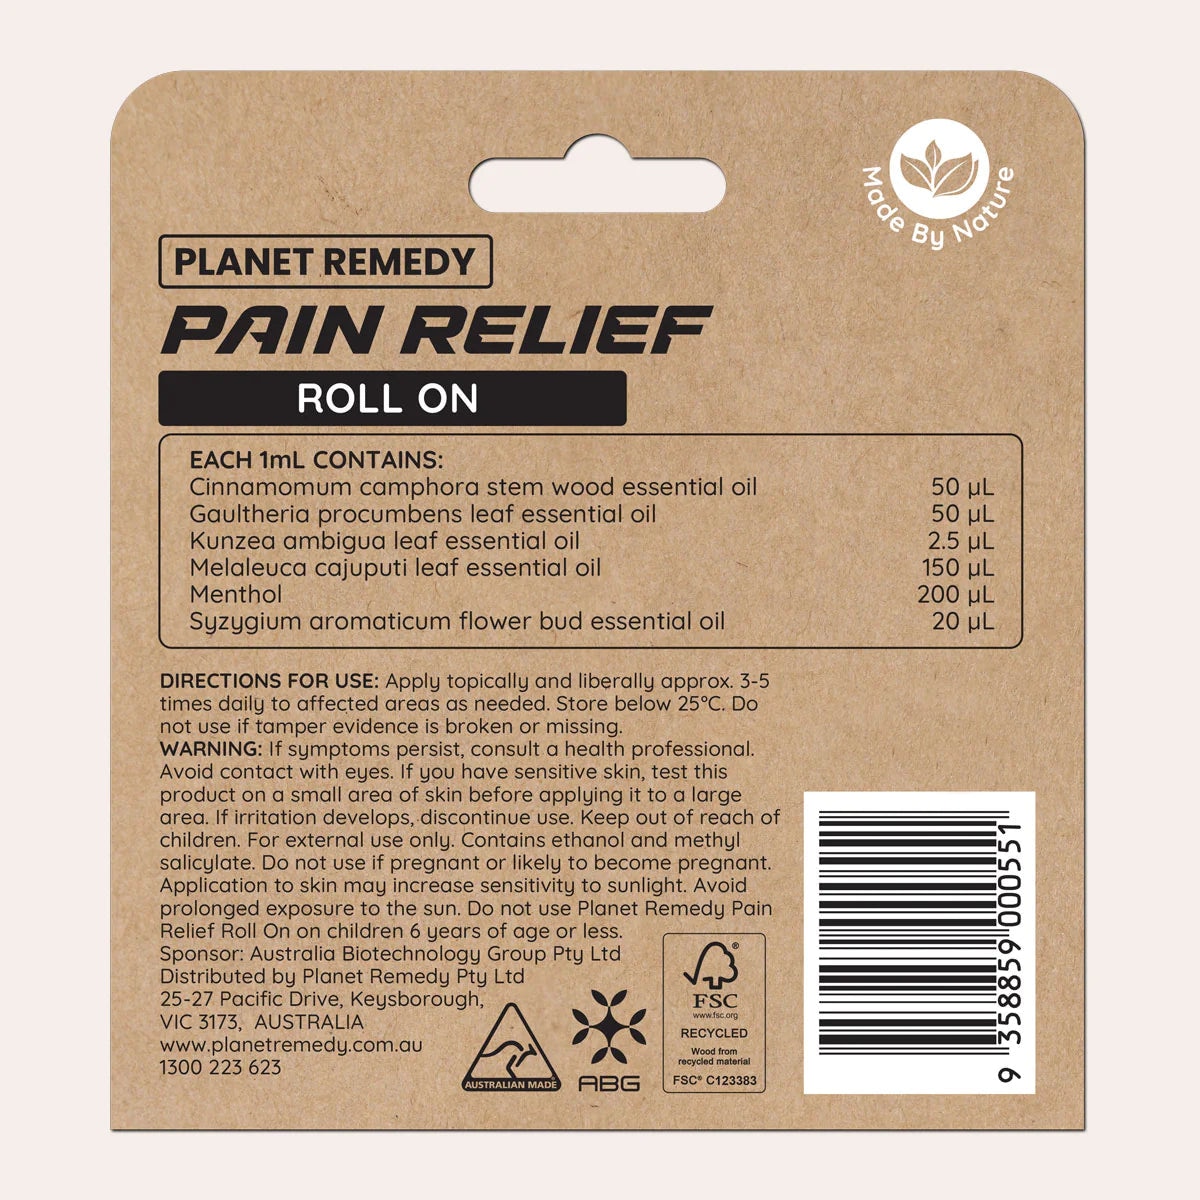 Planet Remedy Pain Relief Roll On 8ml